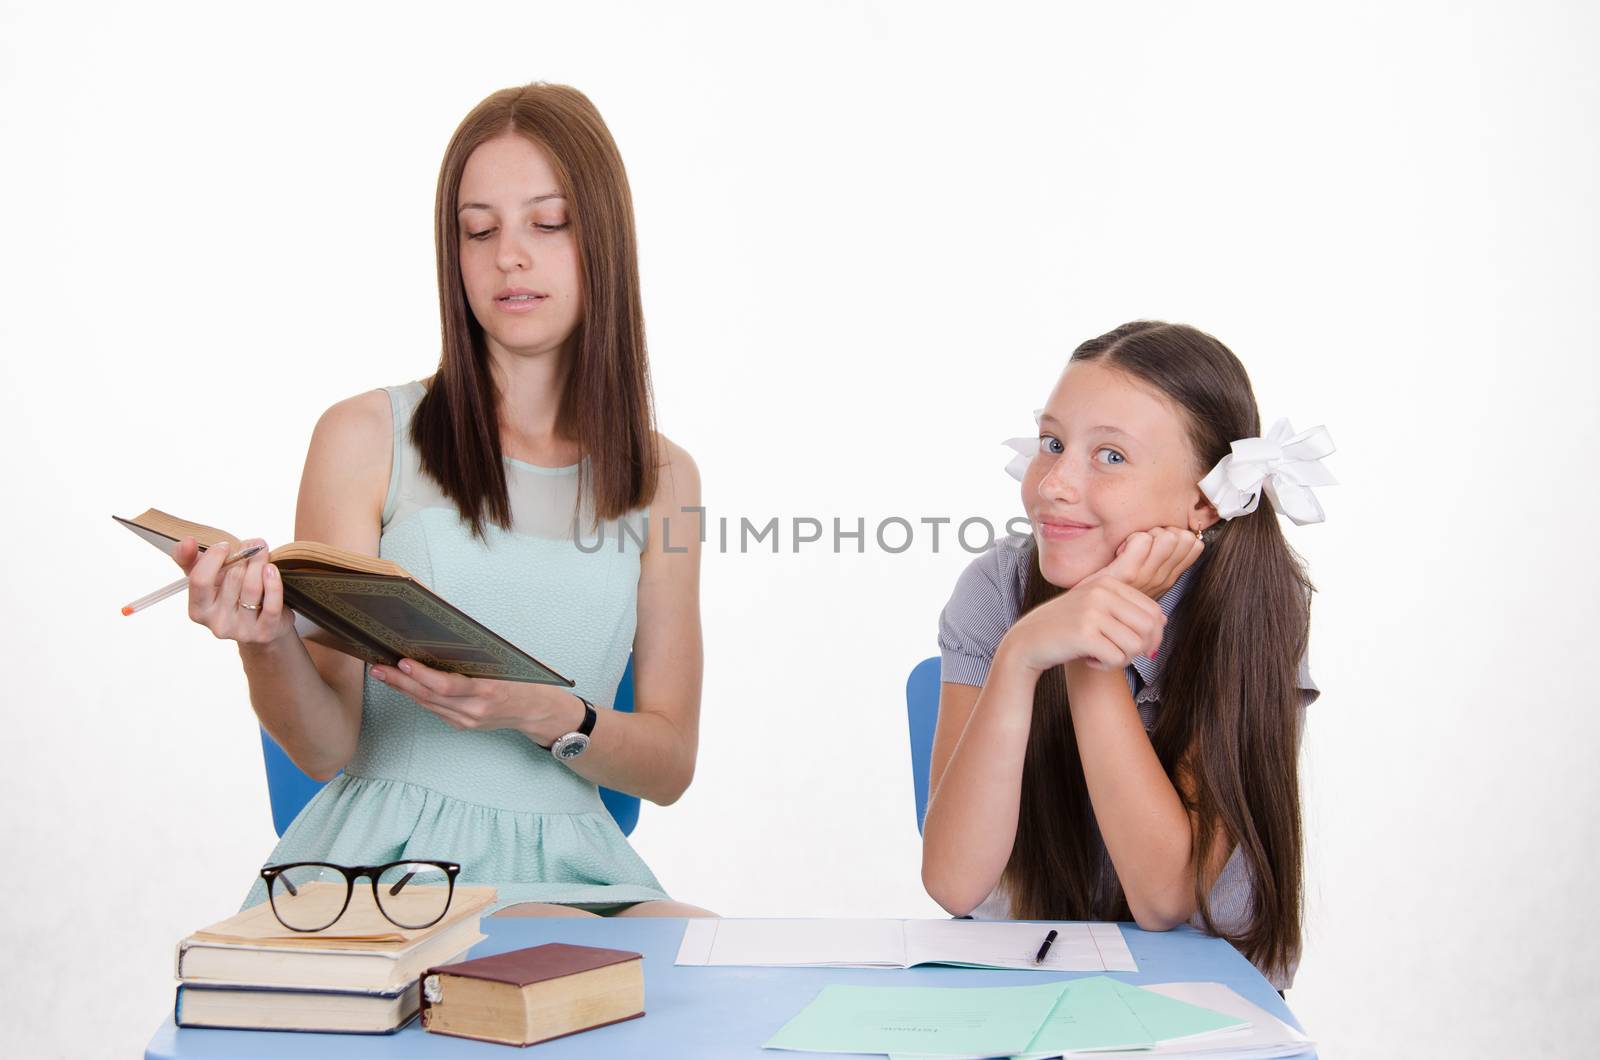 The teacher reads student assignments from textbook by Madhourse